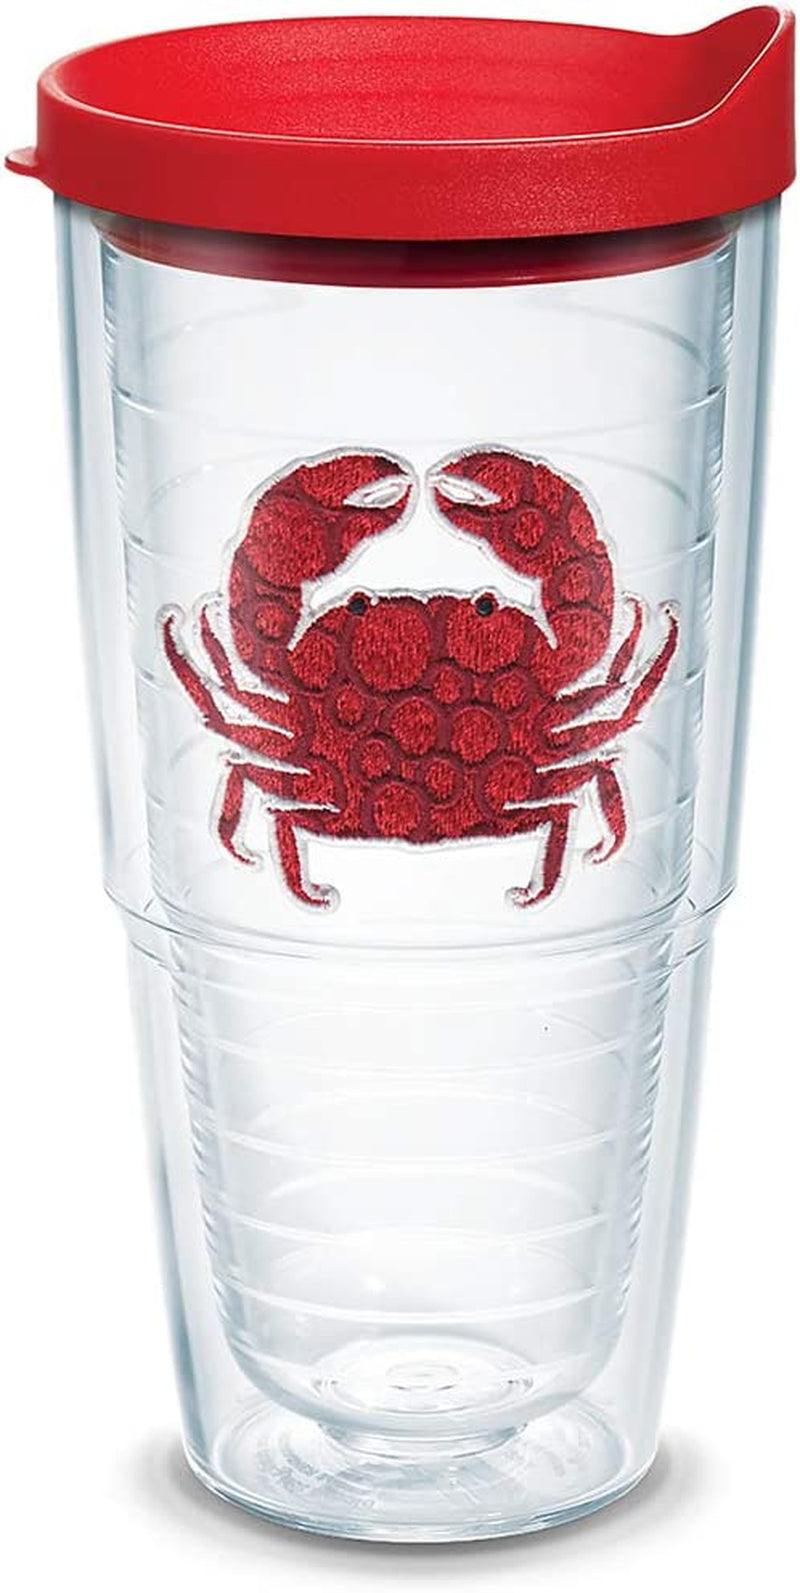 Tervis Crab Insulated Tumbler with Emblem and Red Lid, 16 Oz, Clear